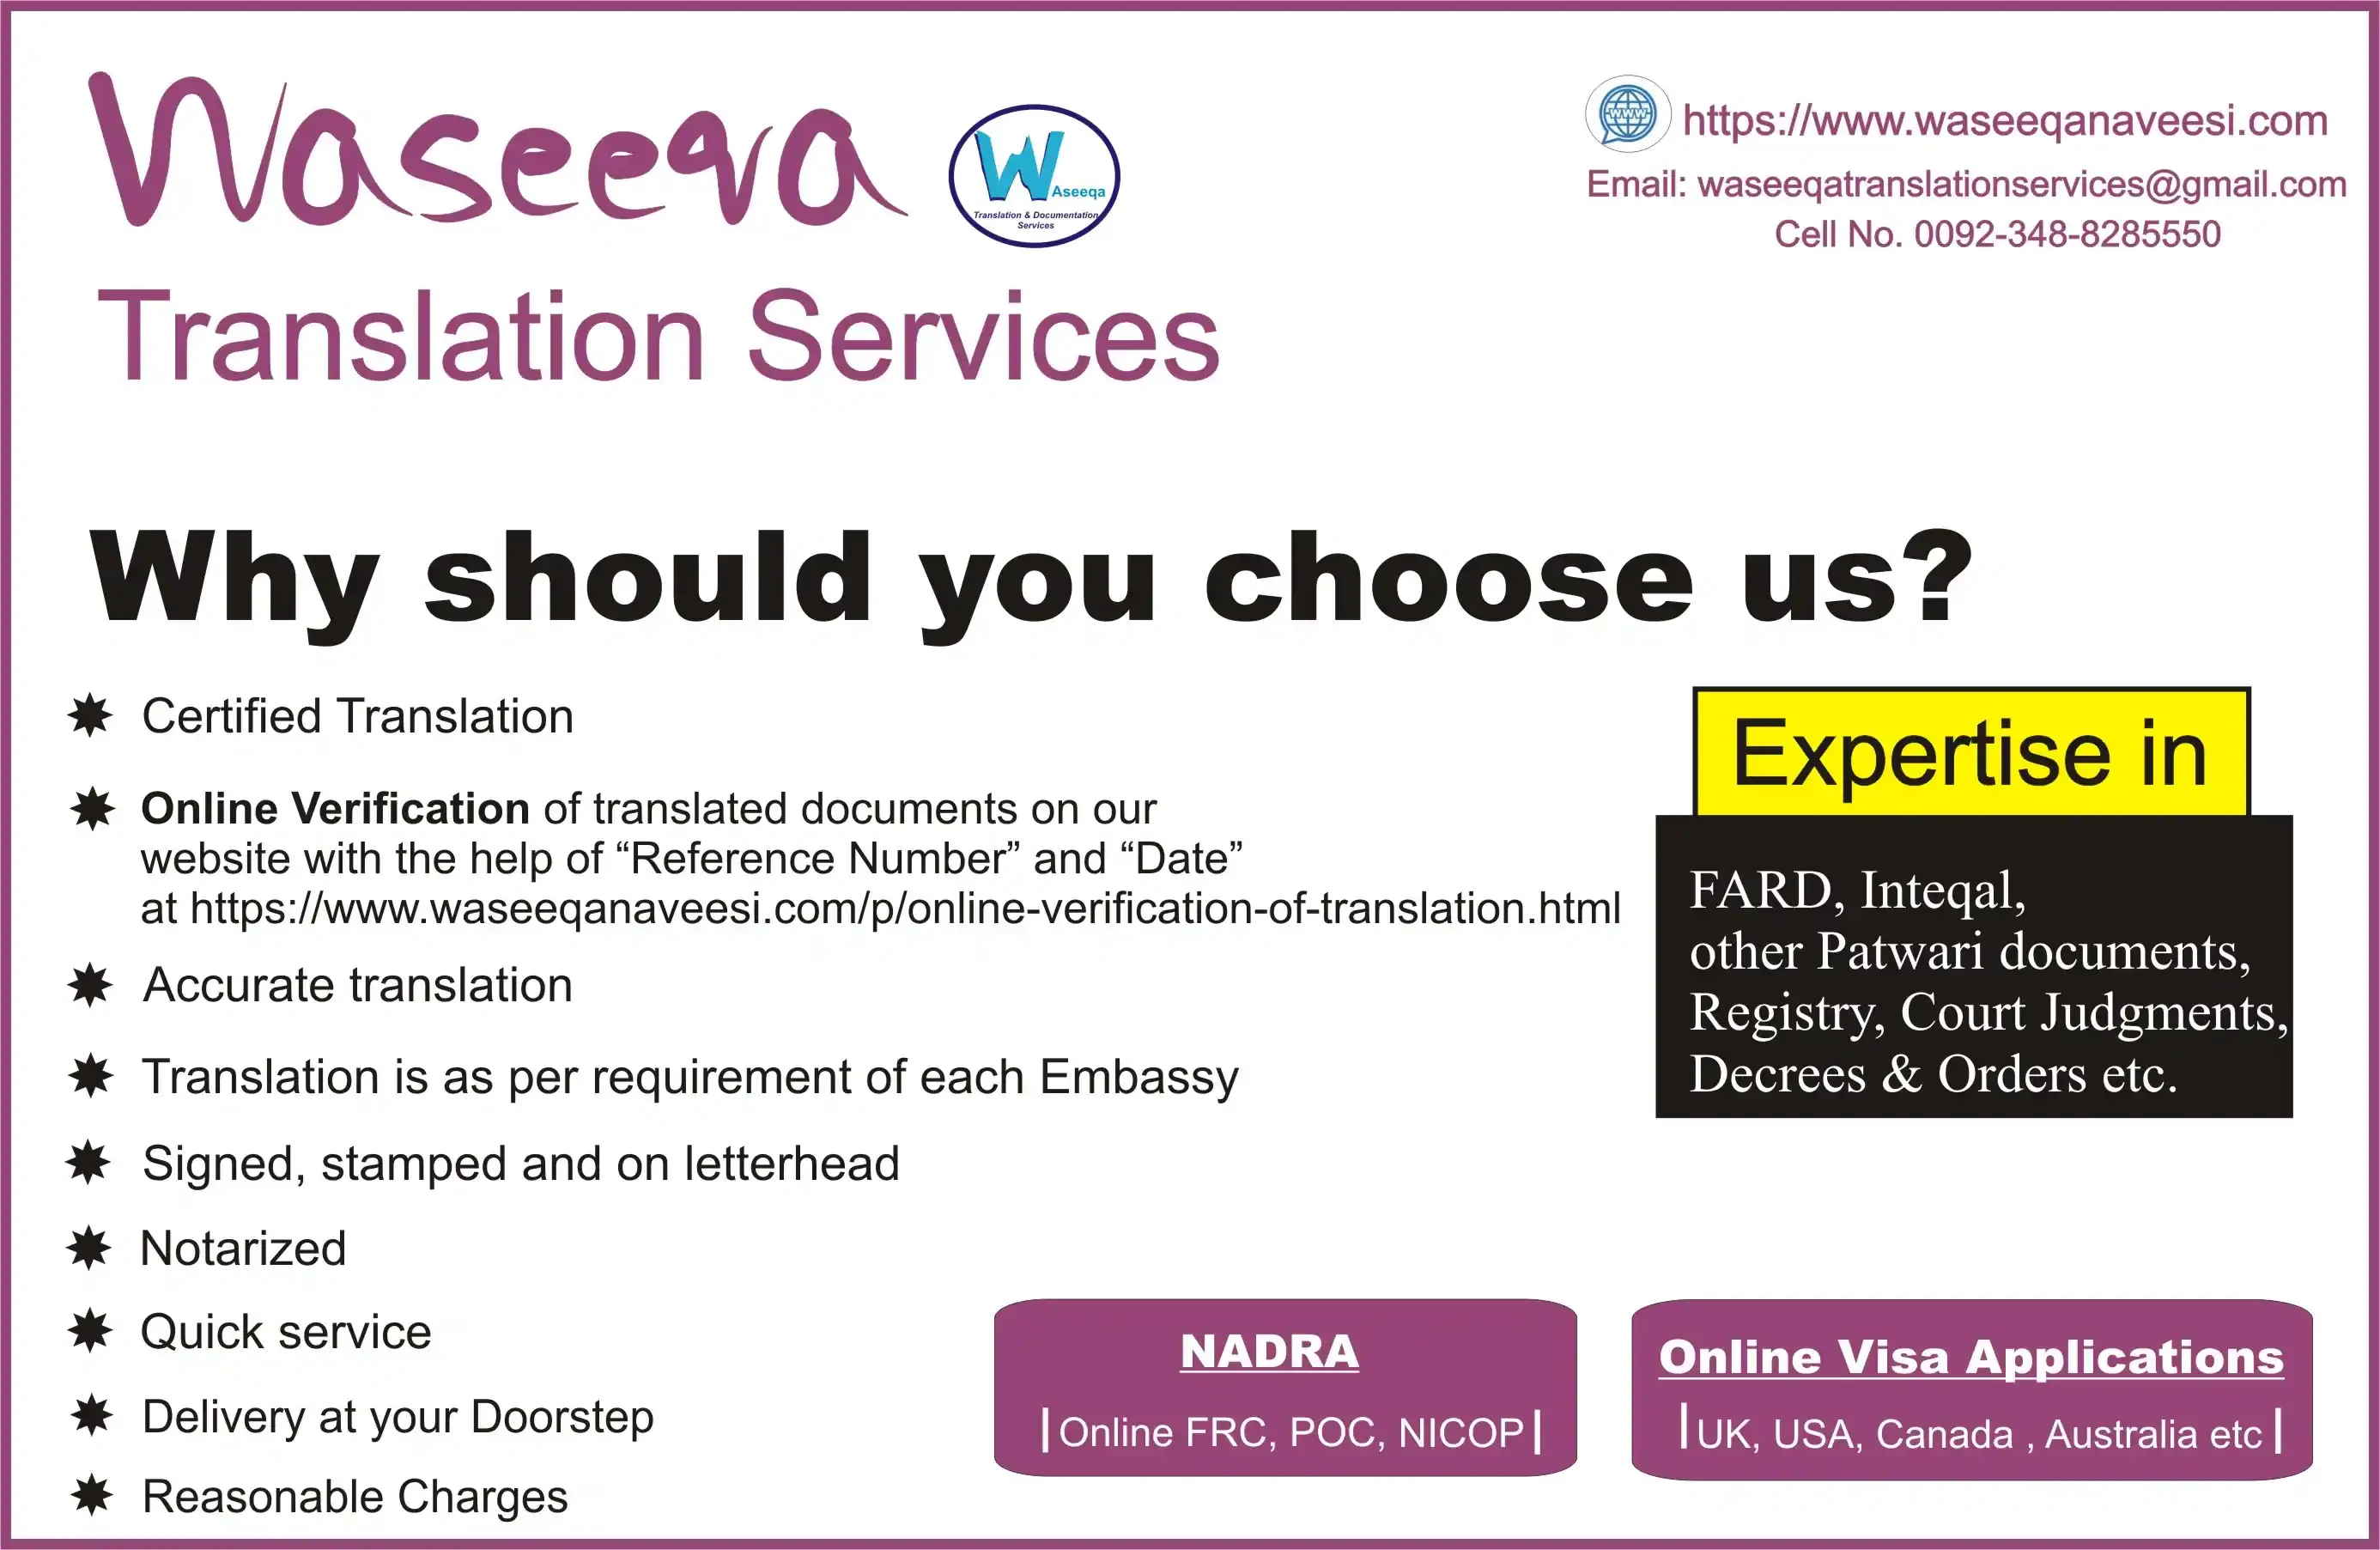 Translation Services by Waseeqa